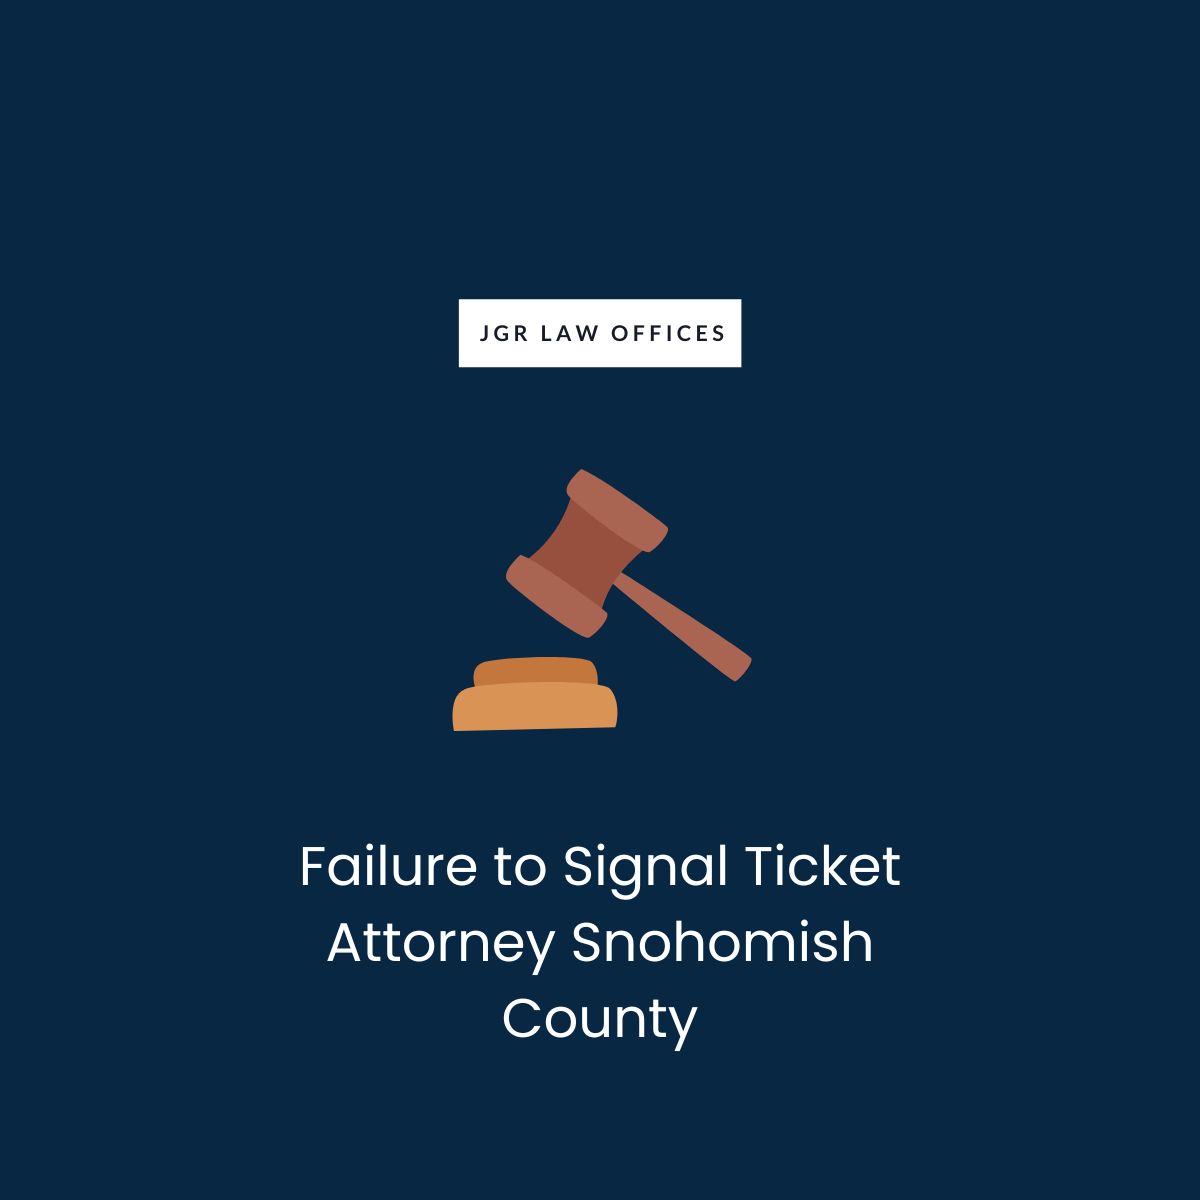 Failure to Signal Ticket Attorney Snohomish County